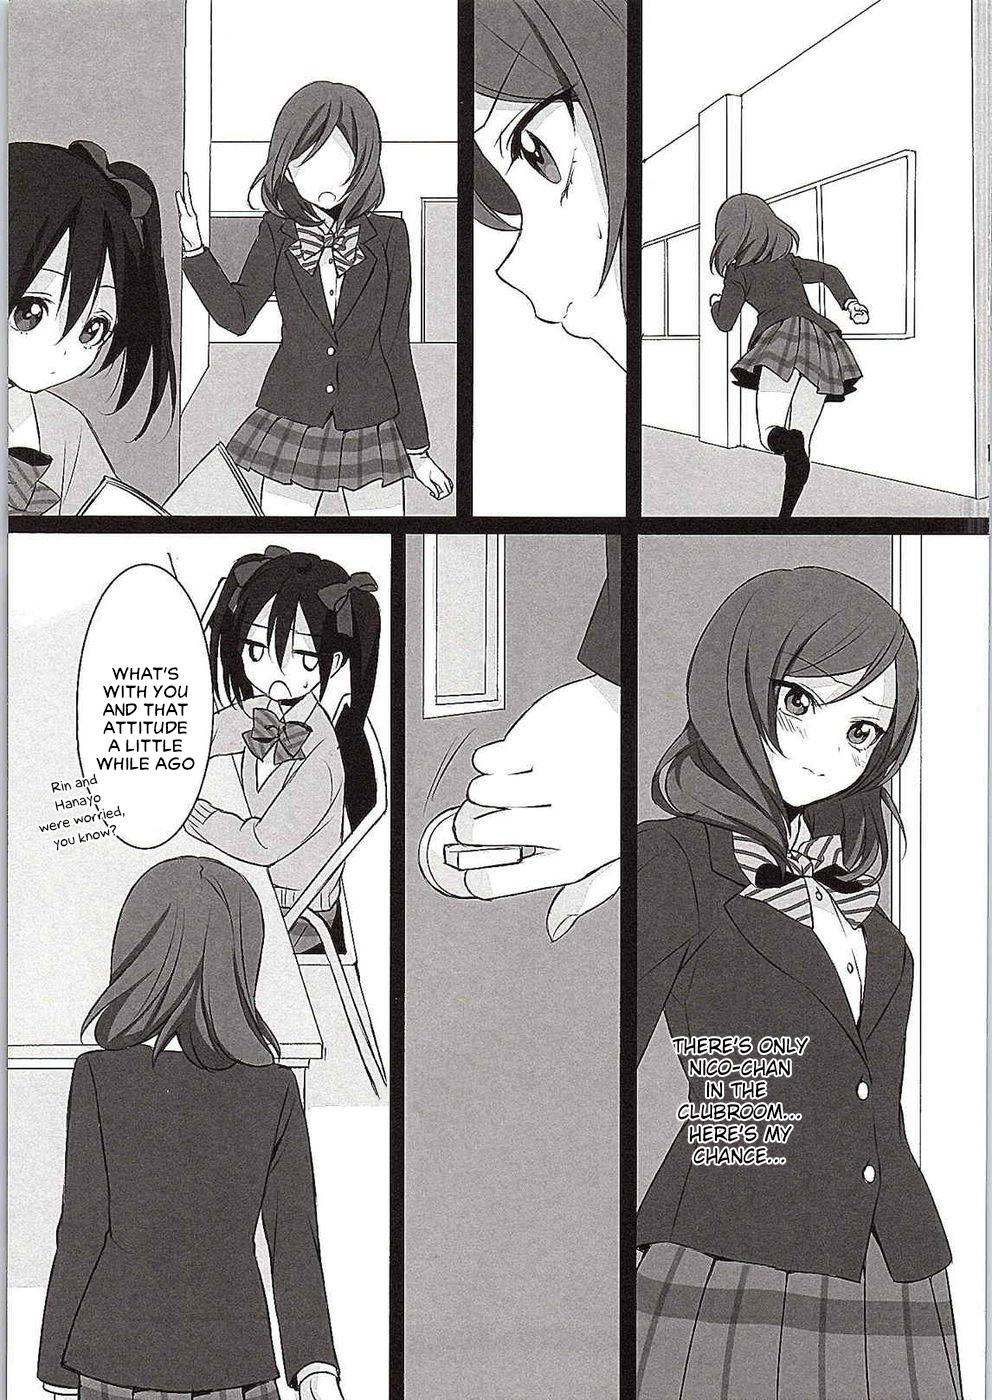 Party Want Me! - Love live Gay Brokenboys - Page 10